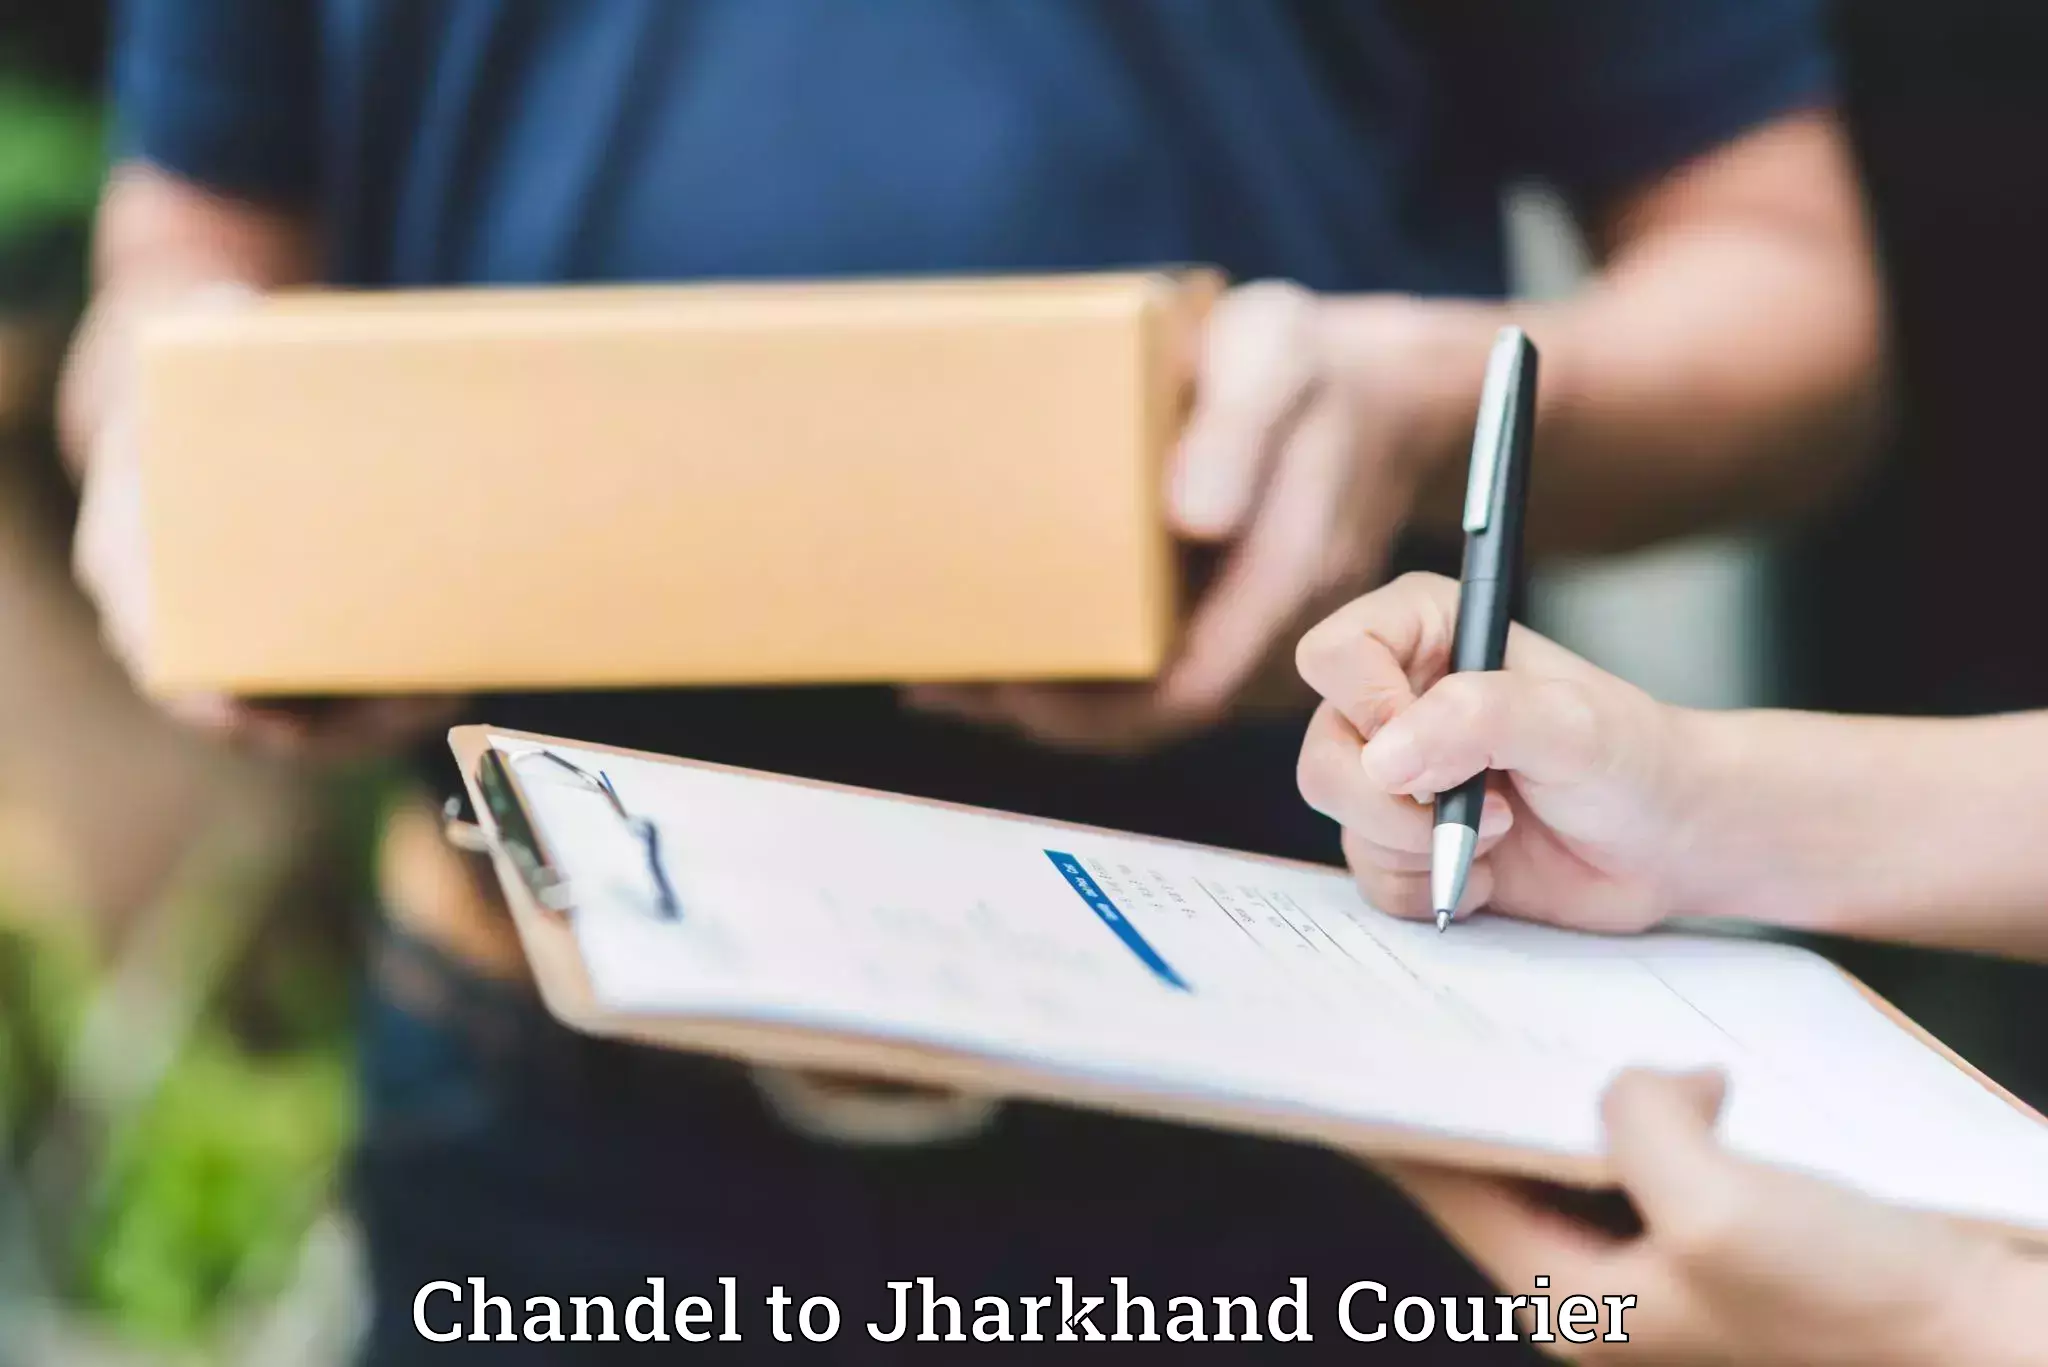 Luggage transport consultancy Chandel to Jharkhand